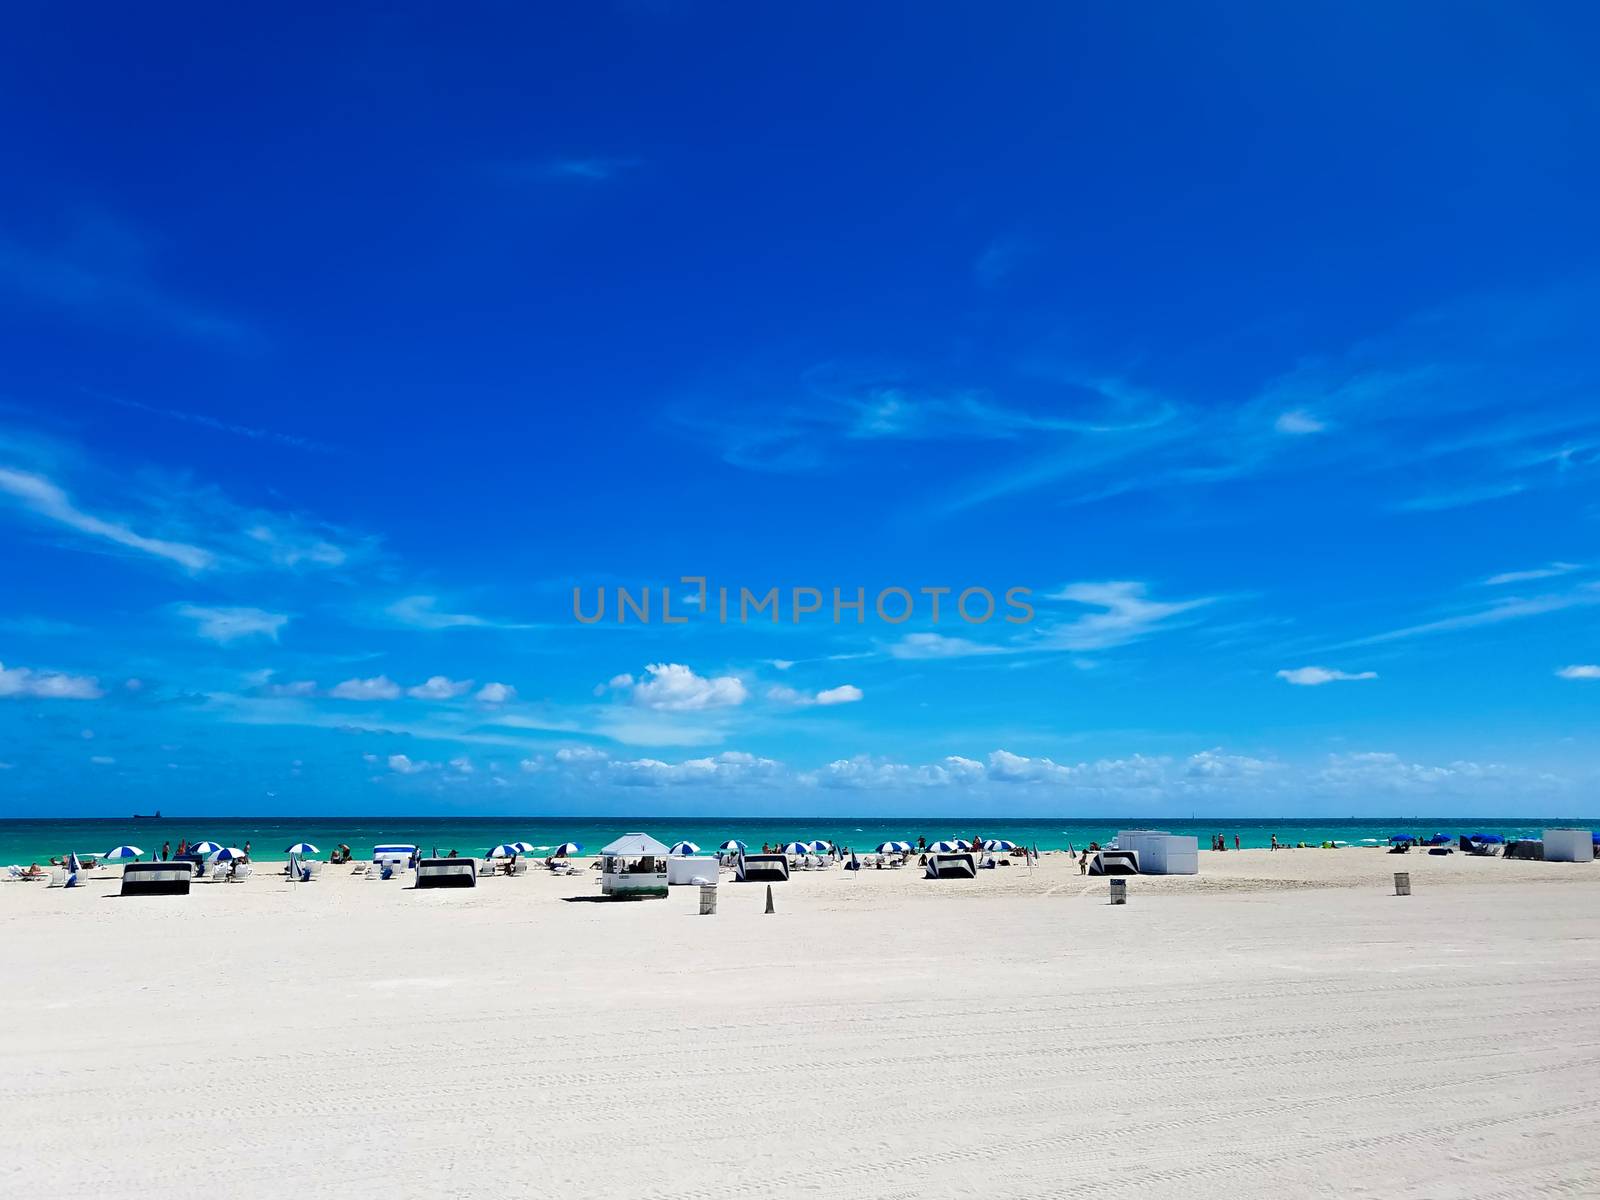 Beach in South Beach, Florida, a city near Miami, with white sand and blue sky, on a suuny day.